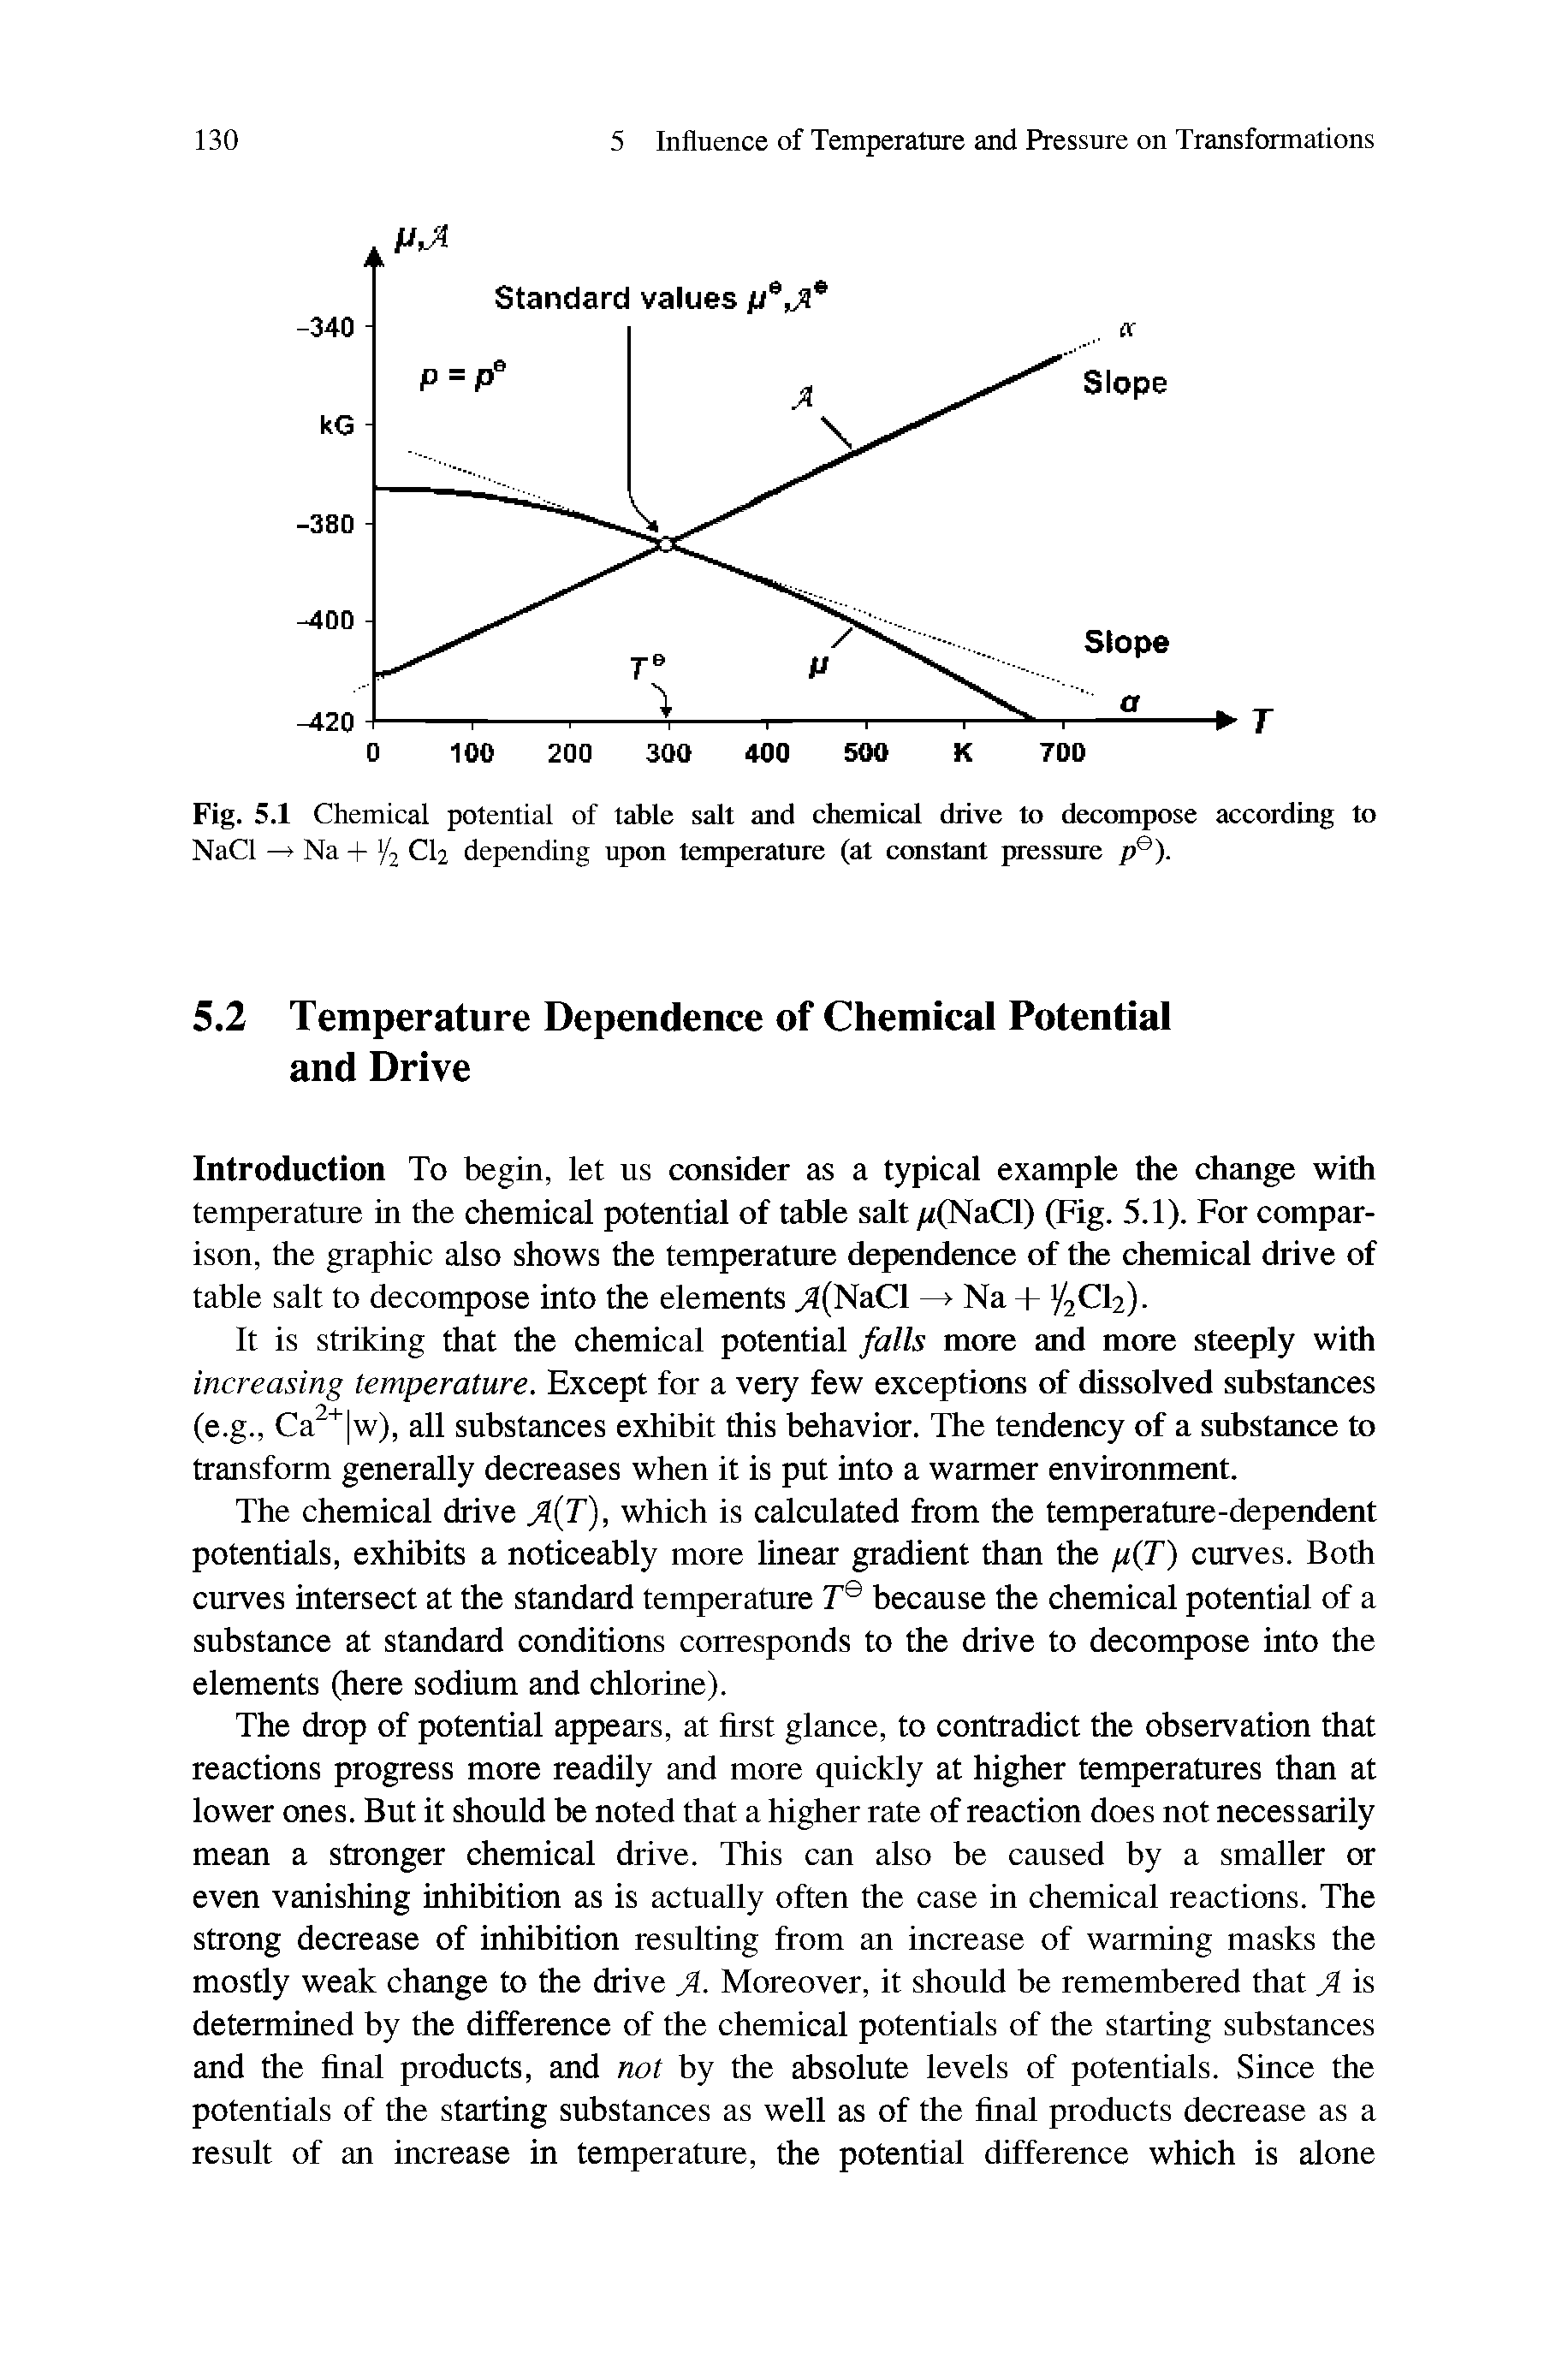 Fig. 5.1 Chemical potential of table salt and chemical drive to decmnpose according to NaCl Na + >/2 CI2 depending upon temperature (at constant pressure p ).